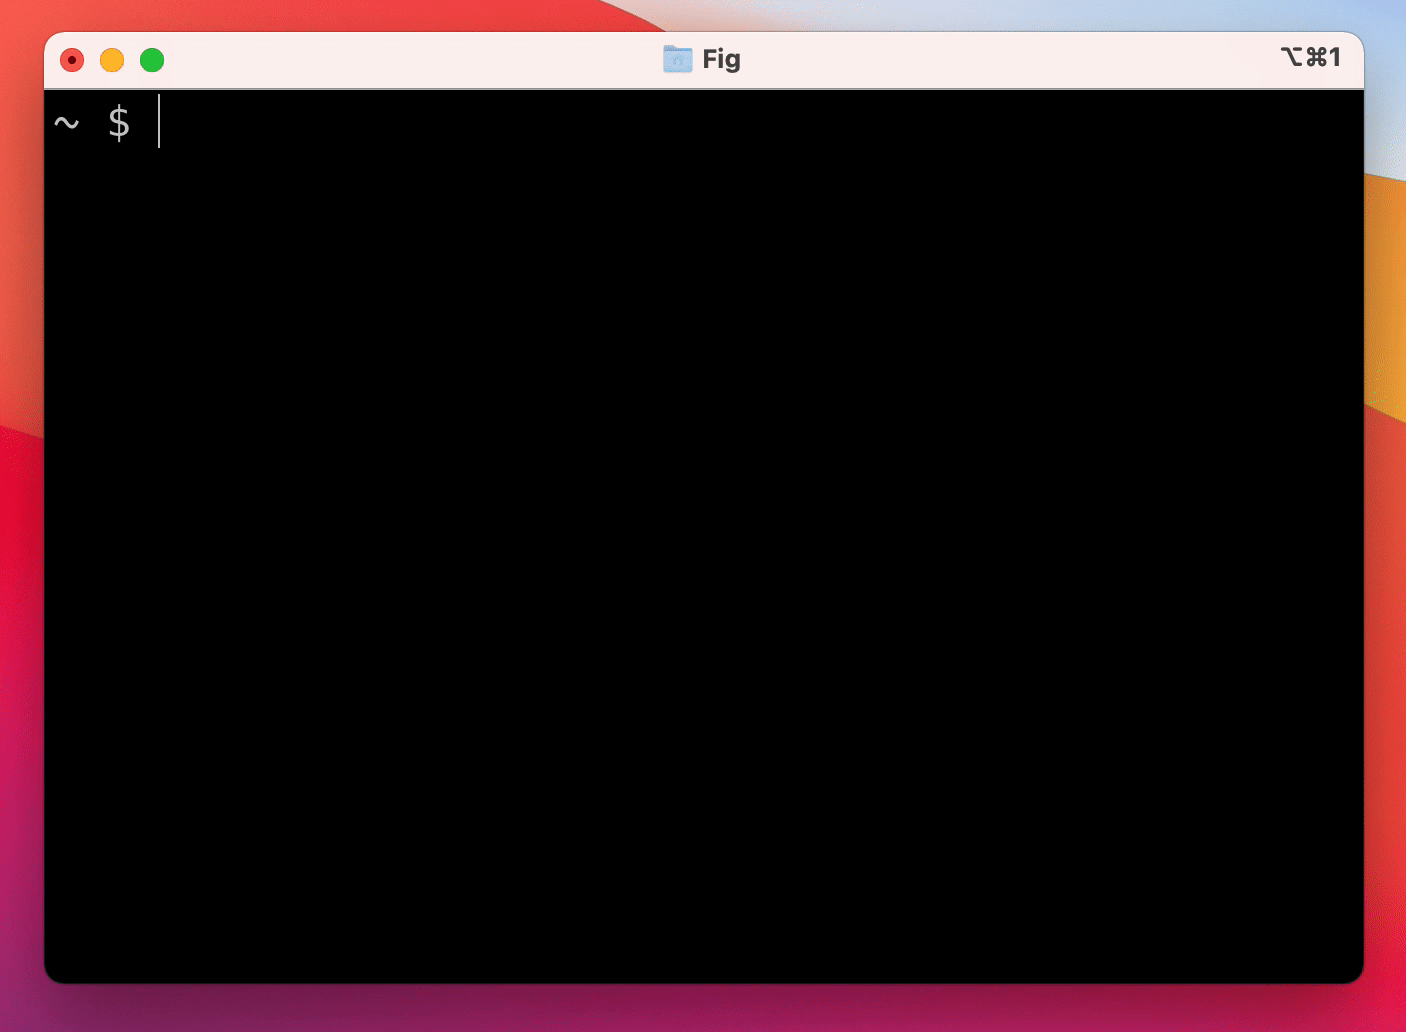 Demo of Figs visual autocomplete in a terminal.gif